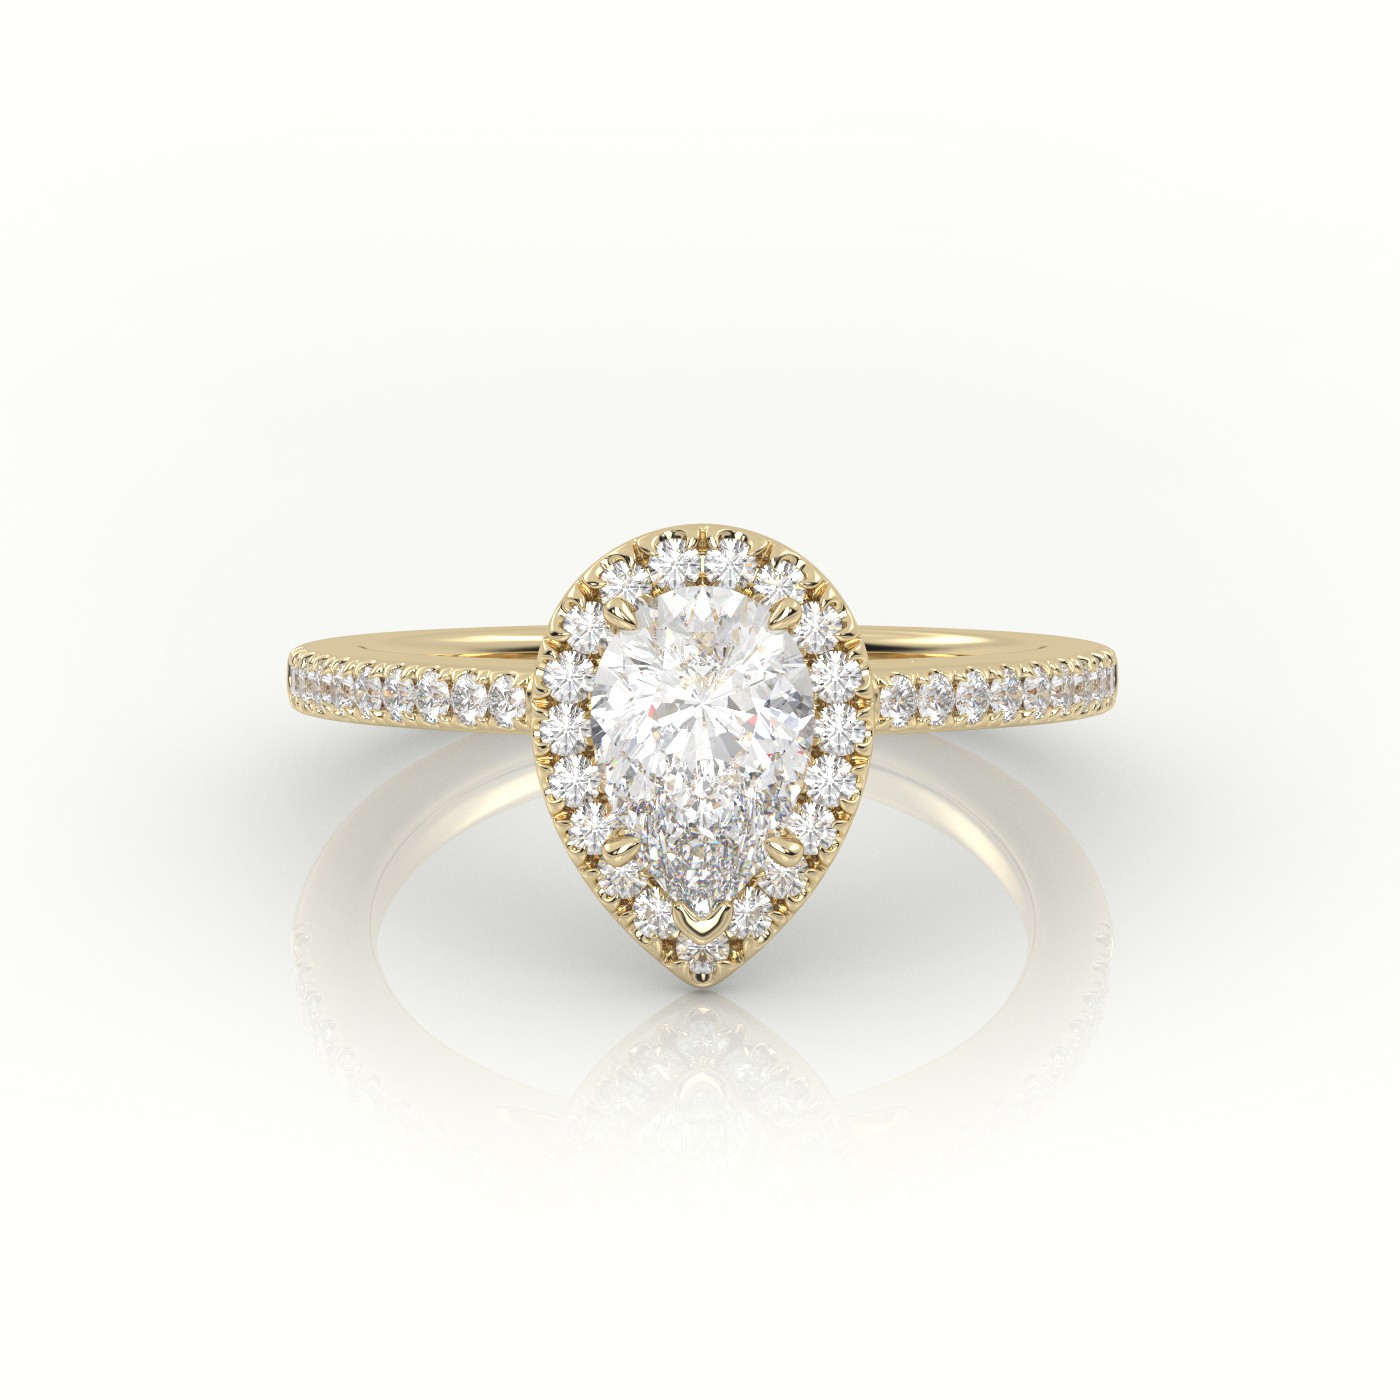 18K YELLOW GOLD PEAR CUT DIAMOND HALO PAVE SETTING ENGAGEMENT RING